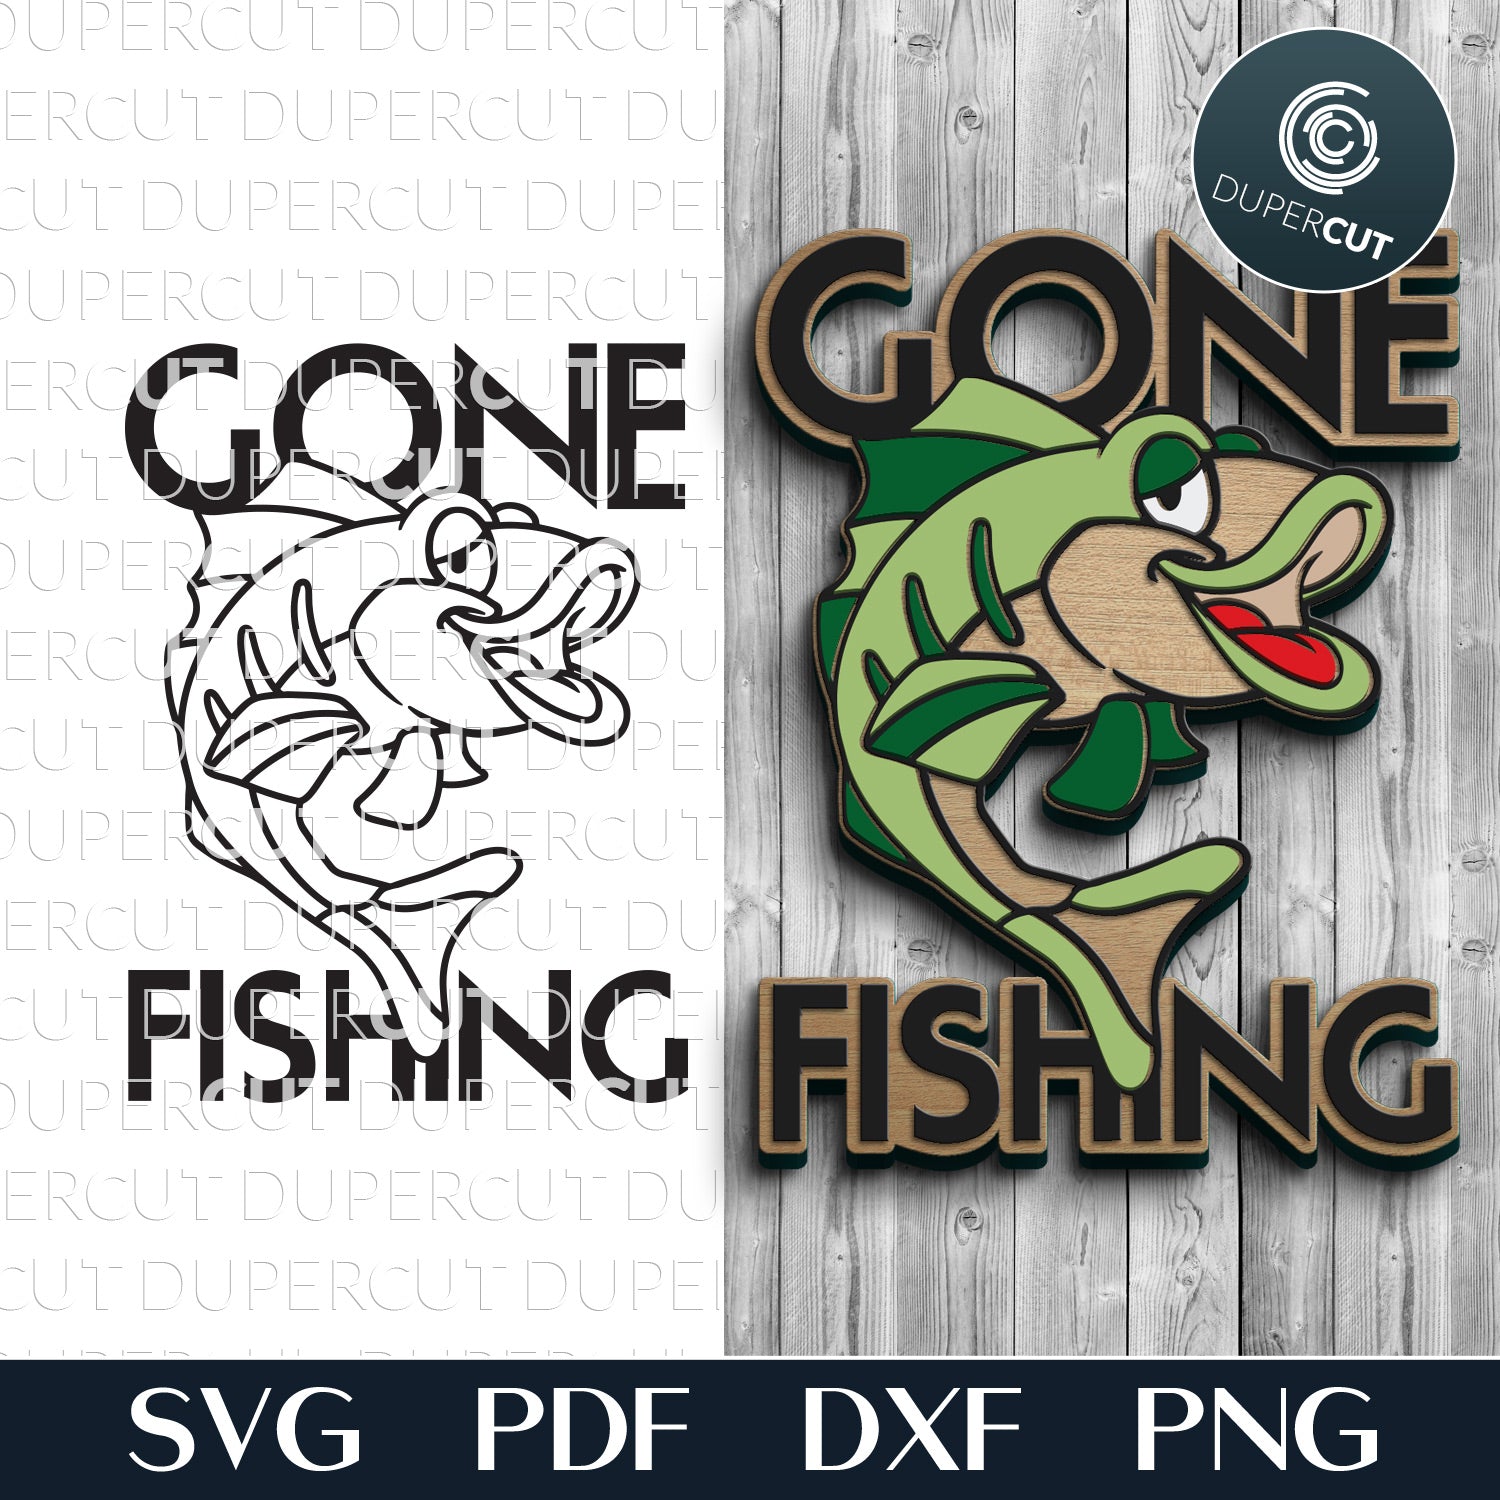 Gone Fishing door hanger - SVG DXF layered files for laser cutting with Glowforge, X-tool, Cricut, CNC plasma machines, scroll saw pattern by www.DuperCut.com